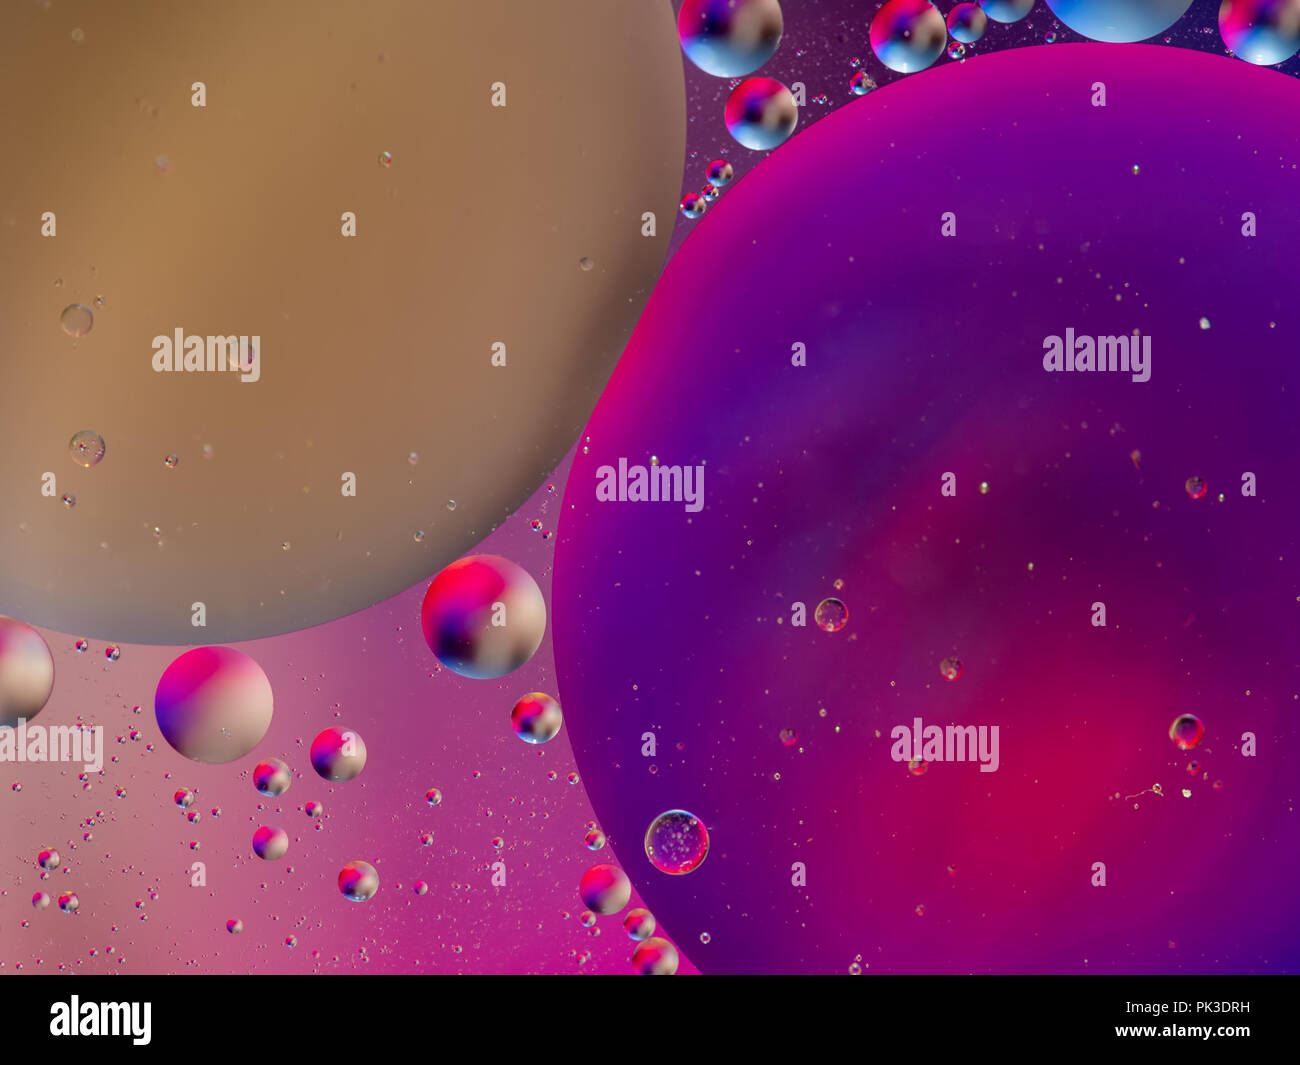 Big bubbles, bubbly oil and water abstract pattern, background. Stock Photo